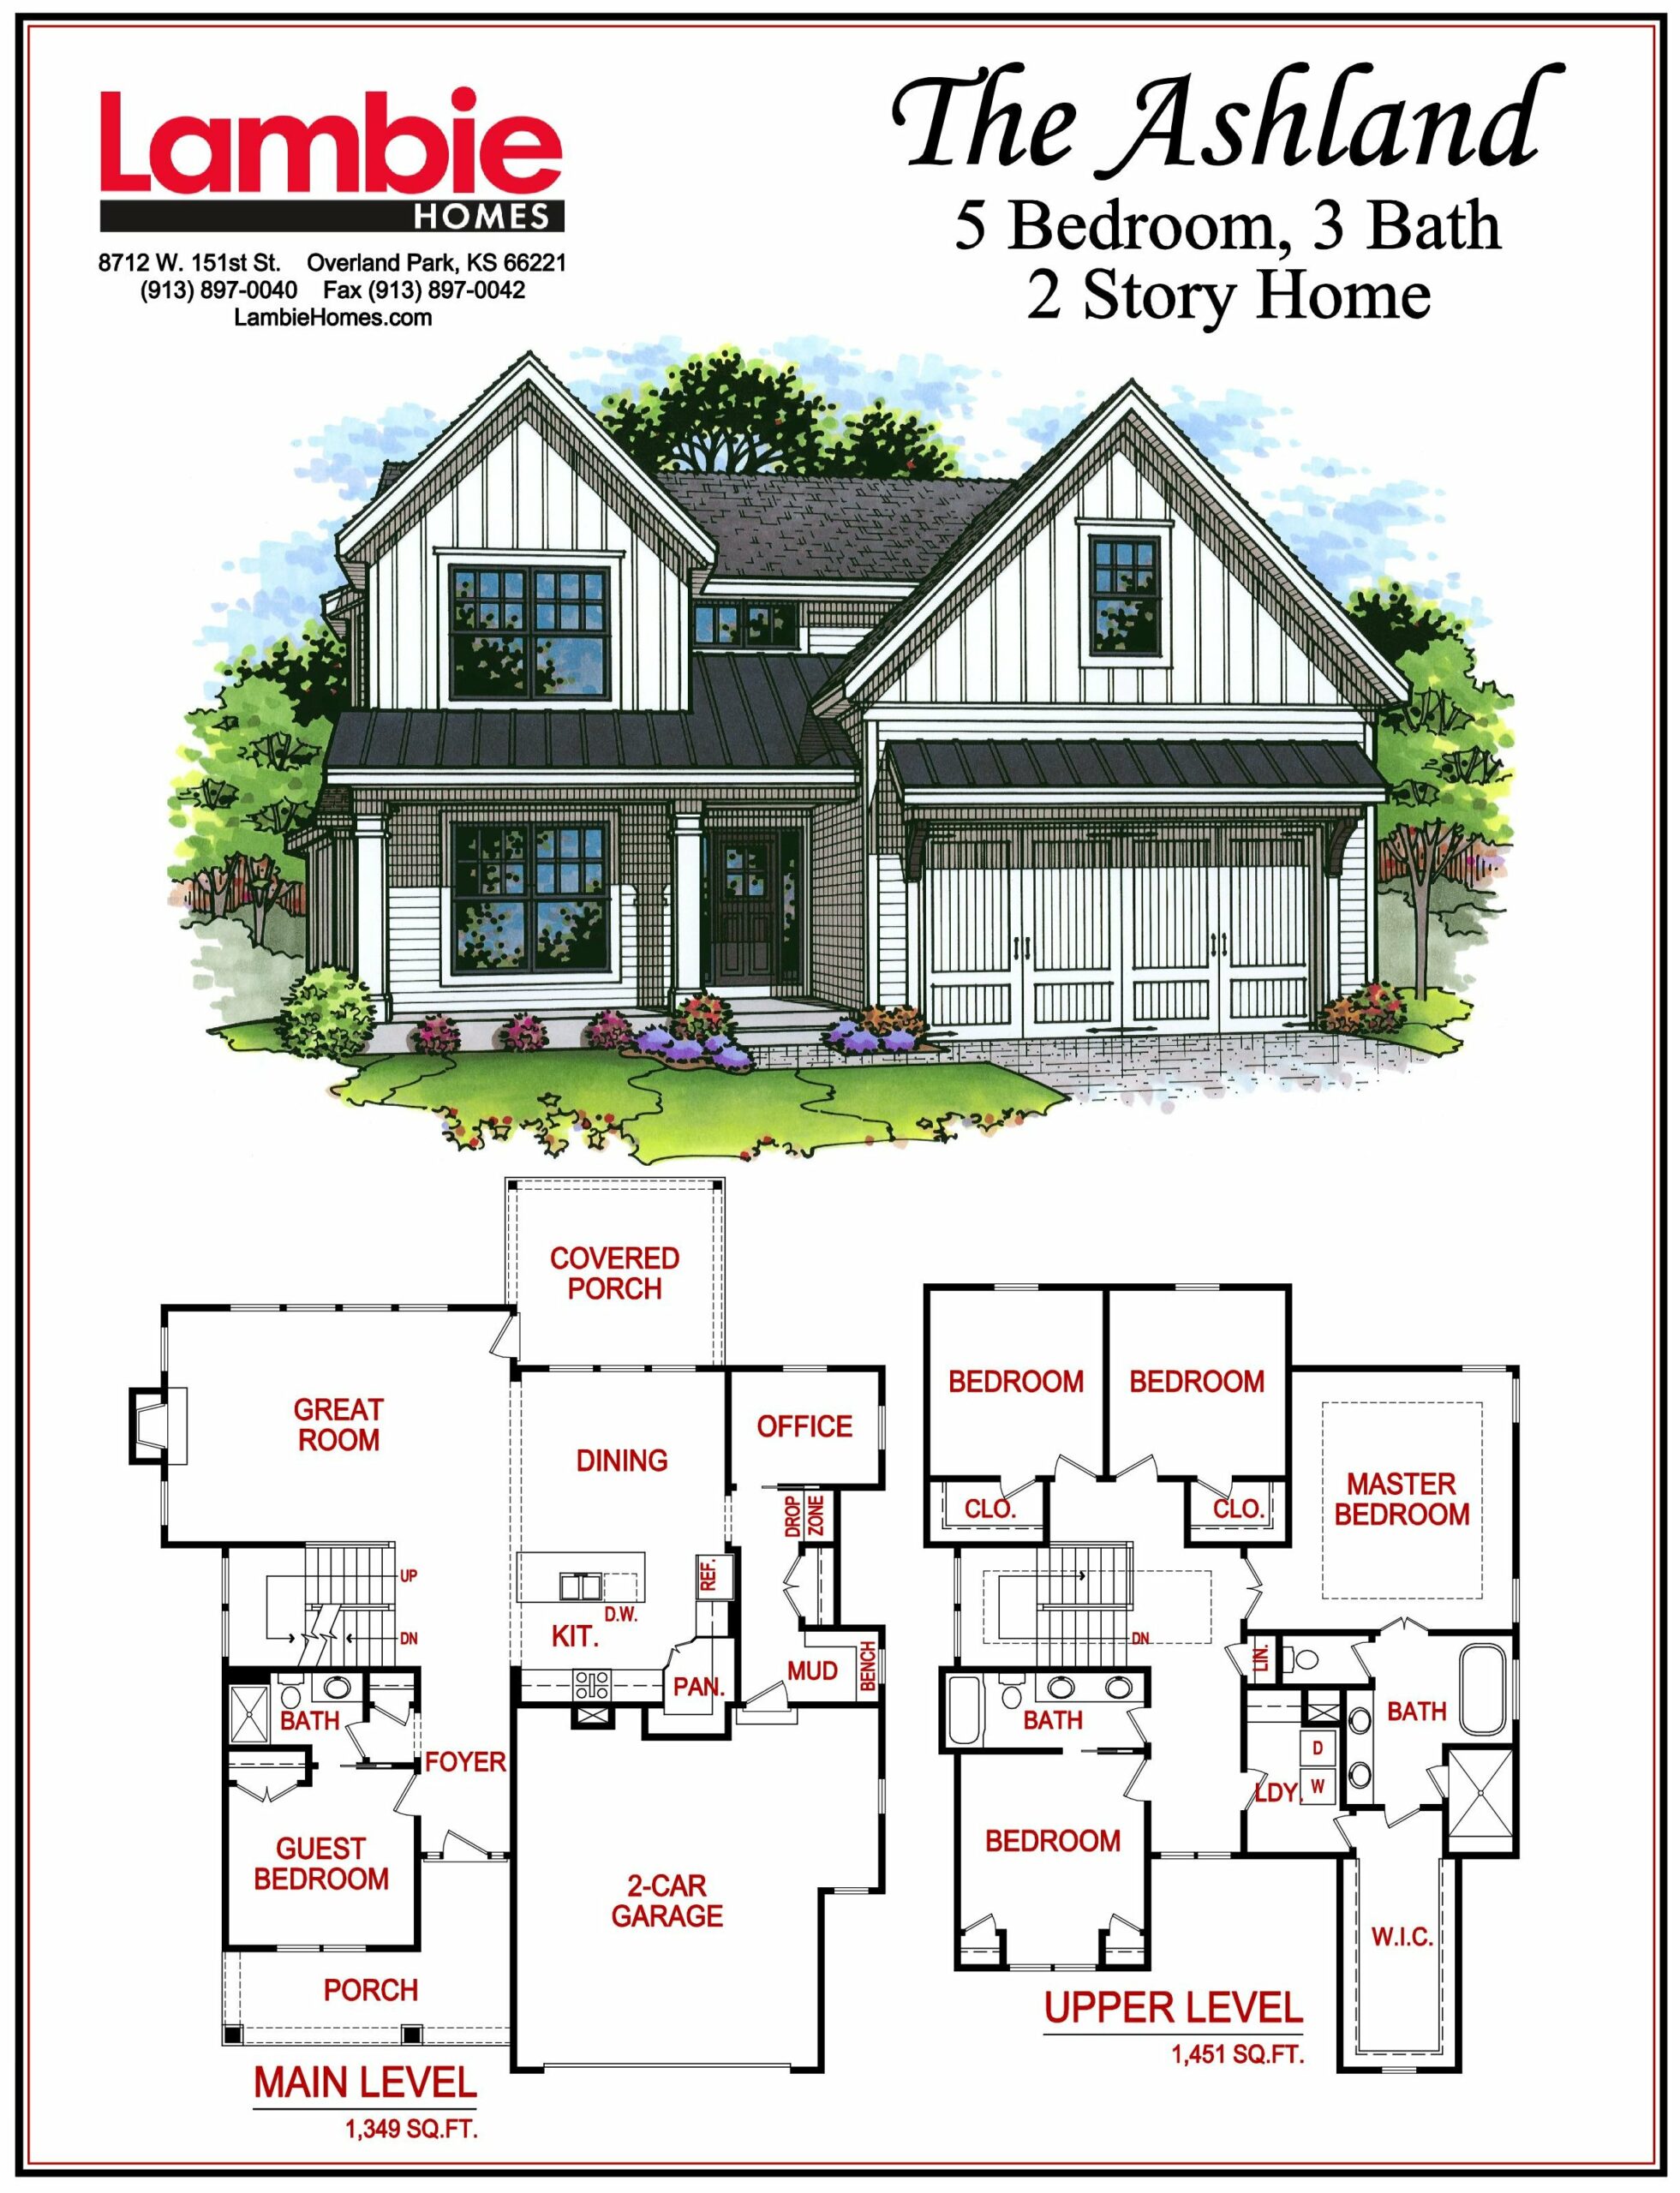 Sales flyer for the ashland model from lambie homes